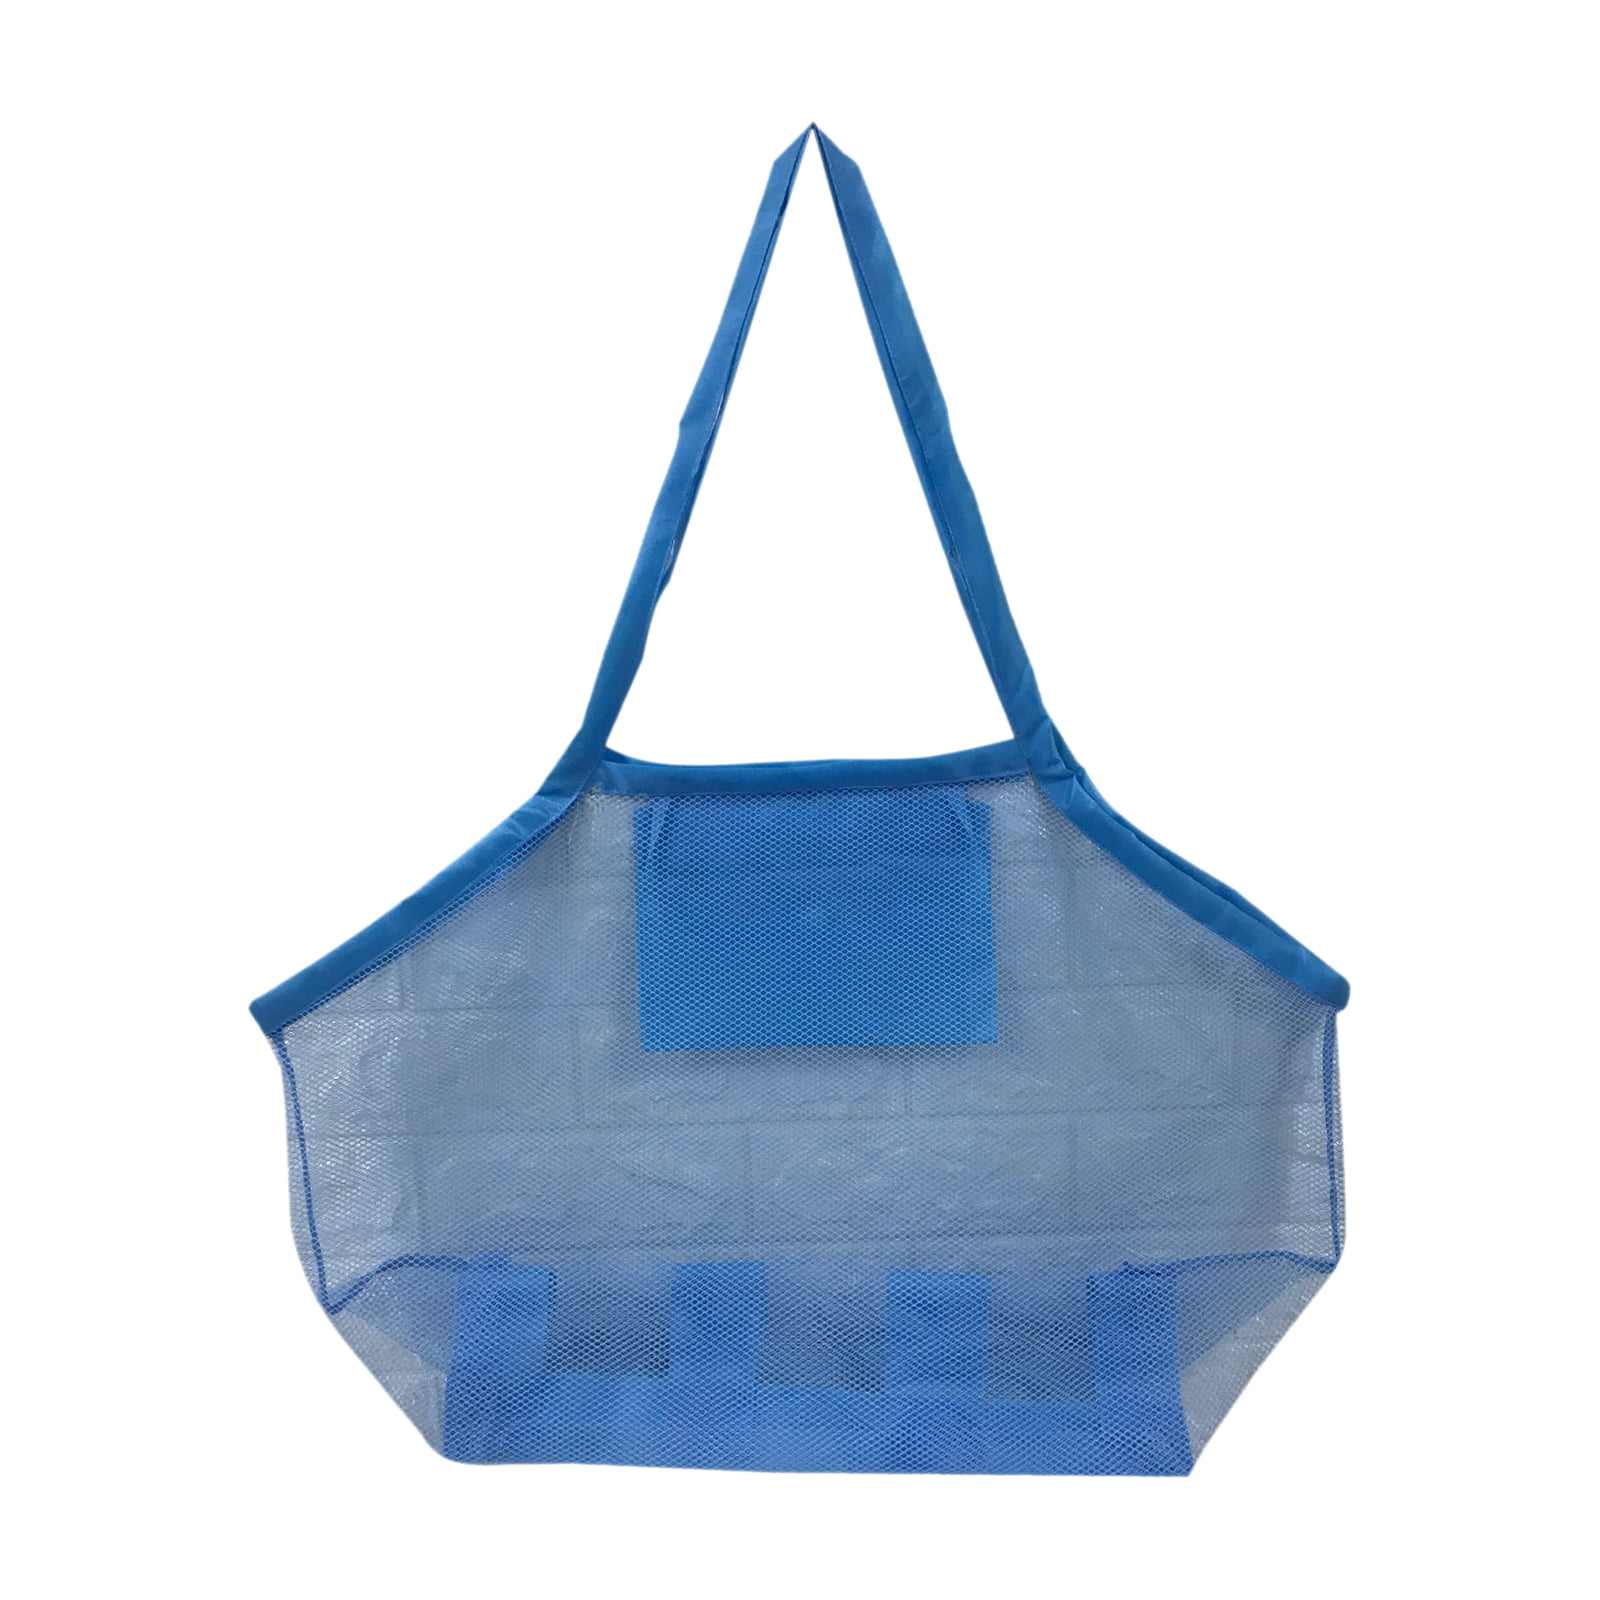 Swim, Toys, Boating. Etc. -Xl Size COFCO Topicker Brand and New Sand Away Beach Mesh Bag Tote Stay Away From Sand 